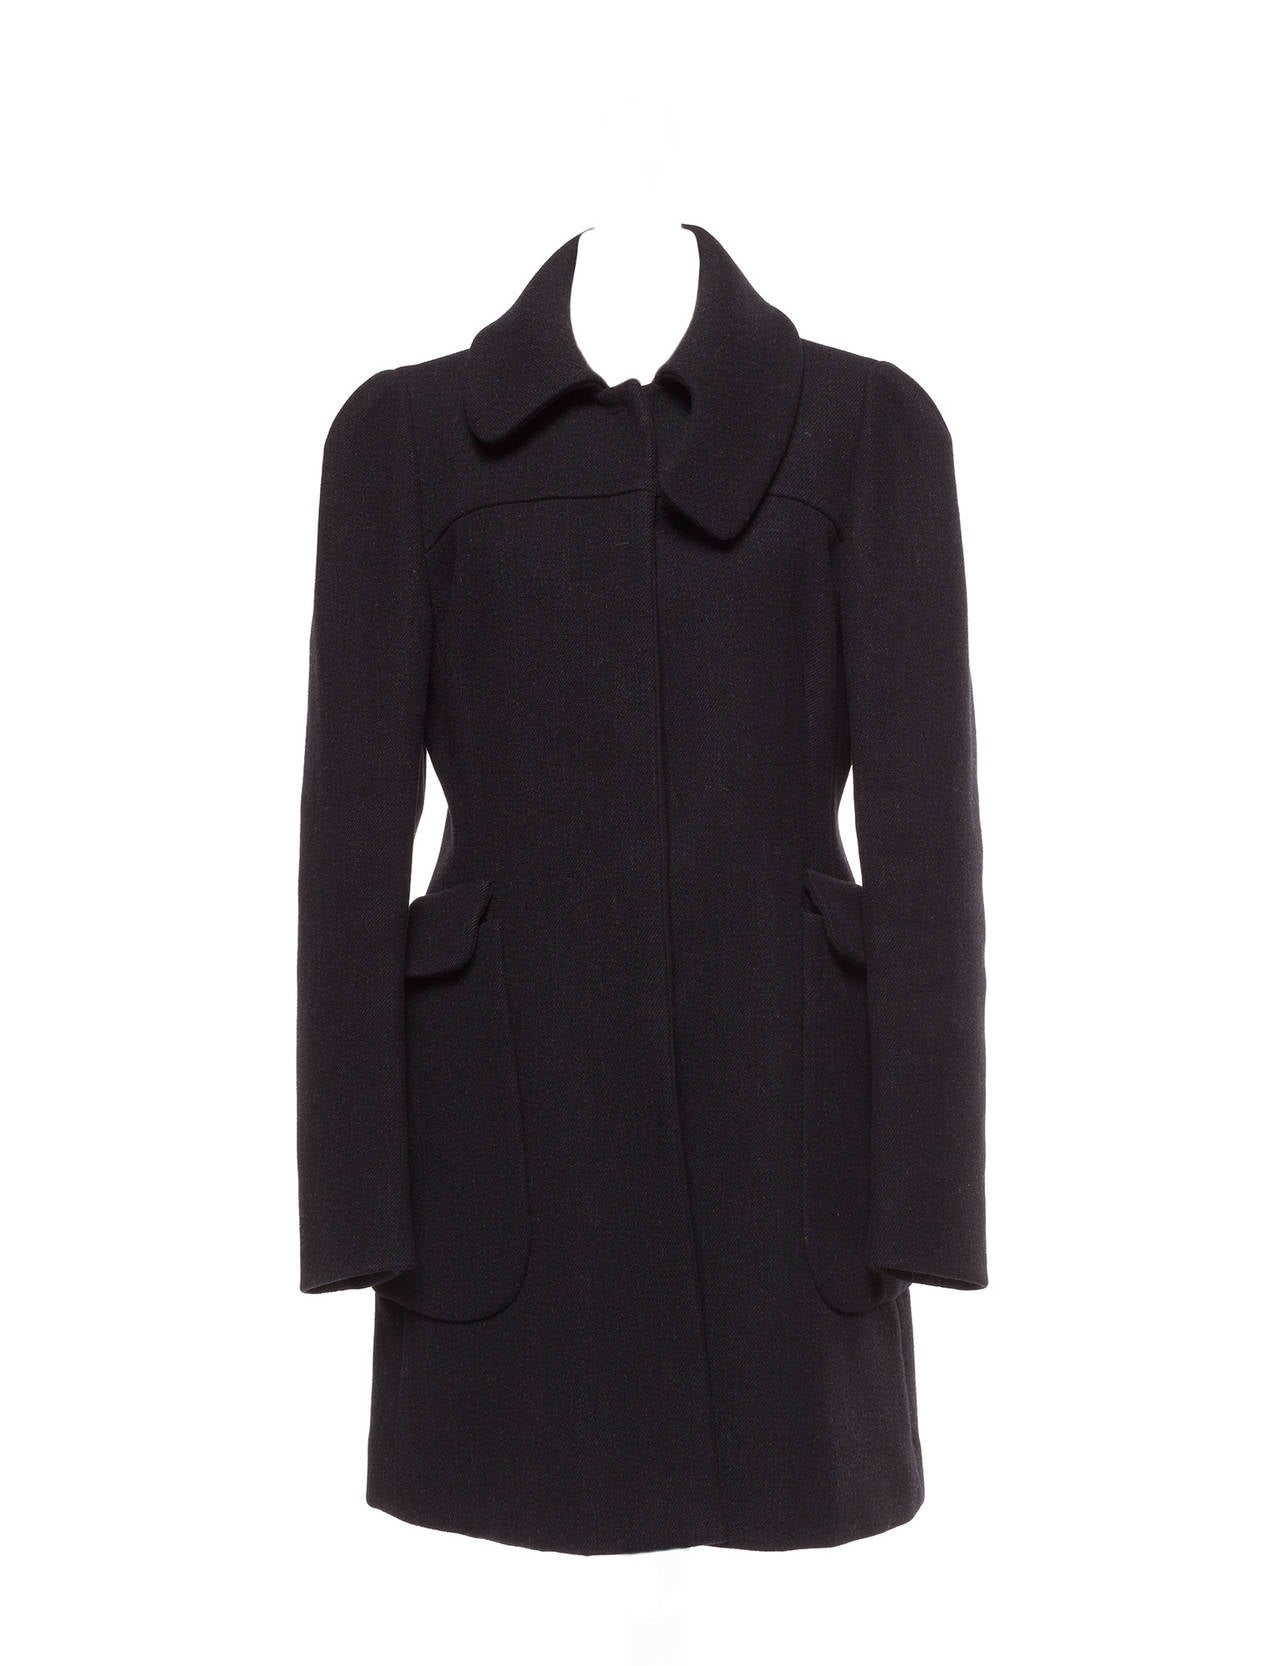 Coat has extended 90's wrap extended collar, large side pockets and stops above knees. Elegant Quality from Prada.